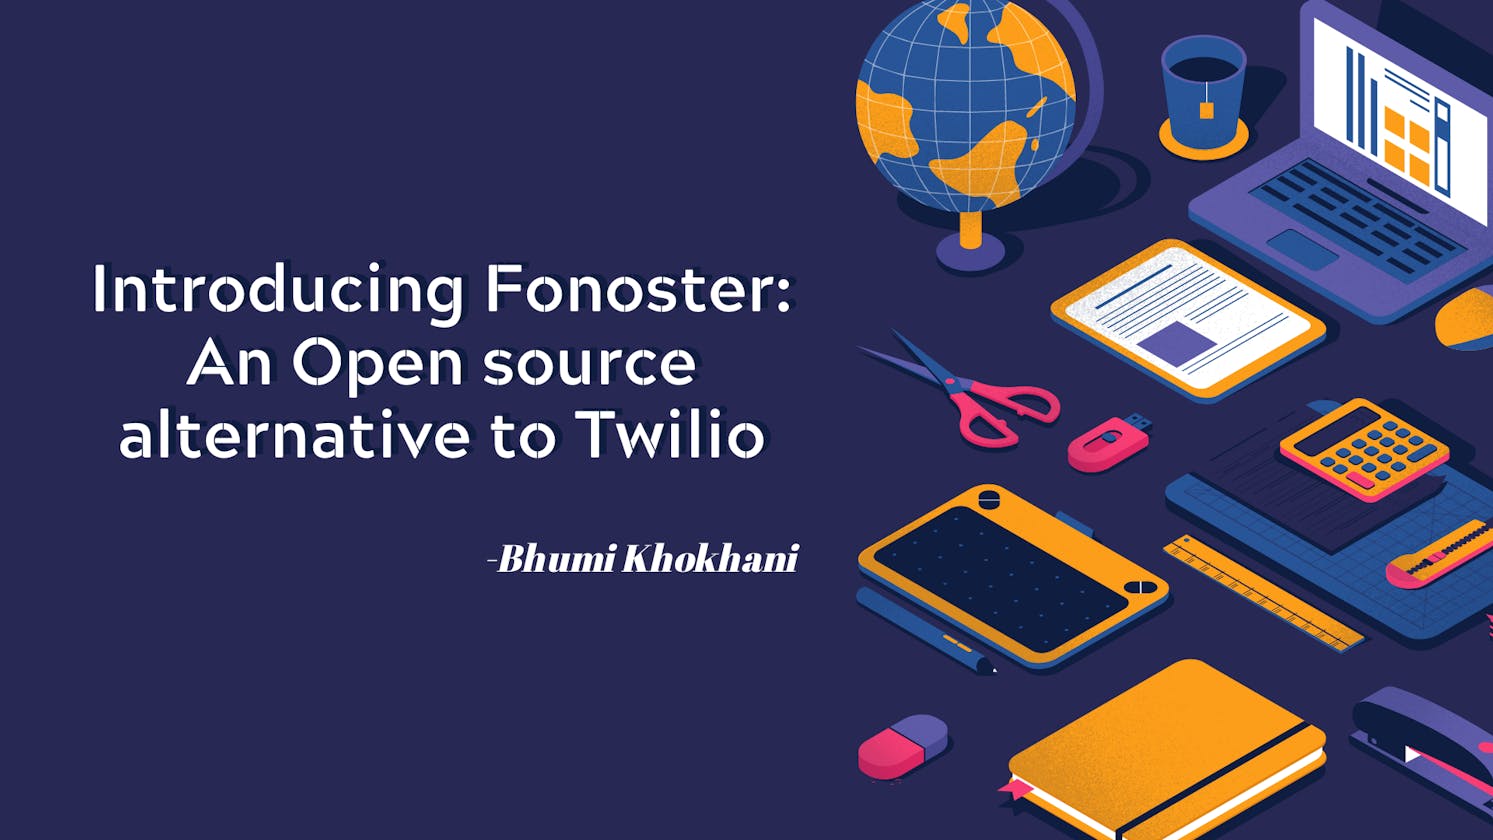 Introducing Fonoster: An Open source alternative to Twilio